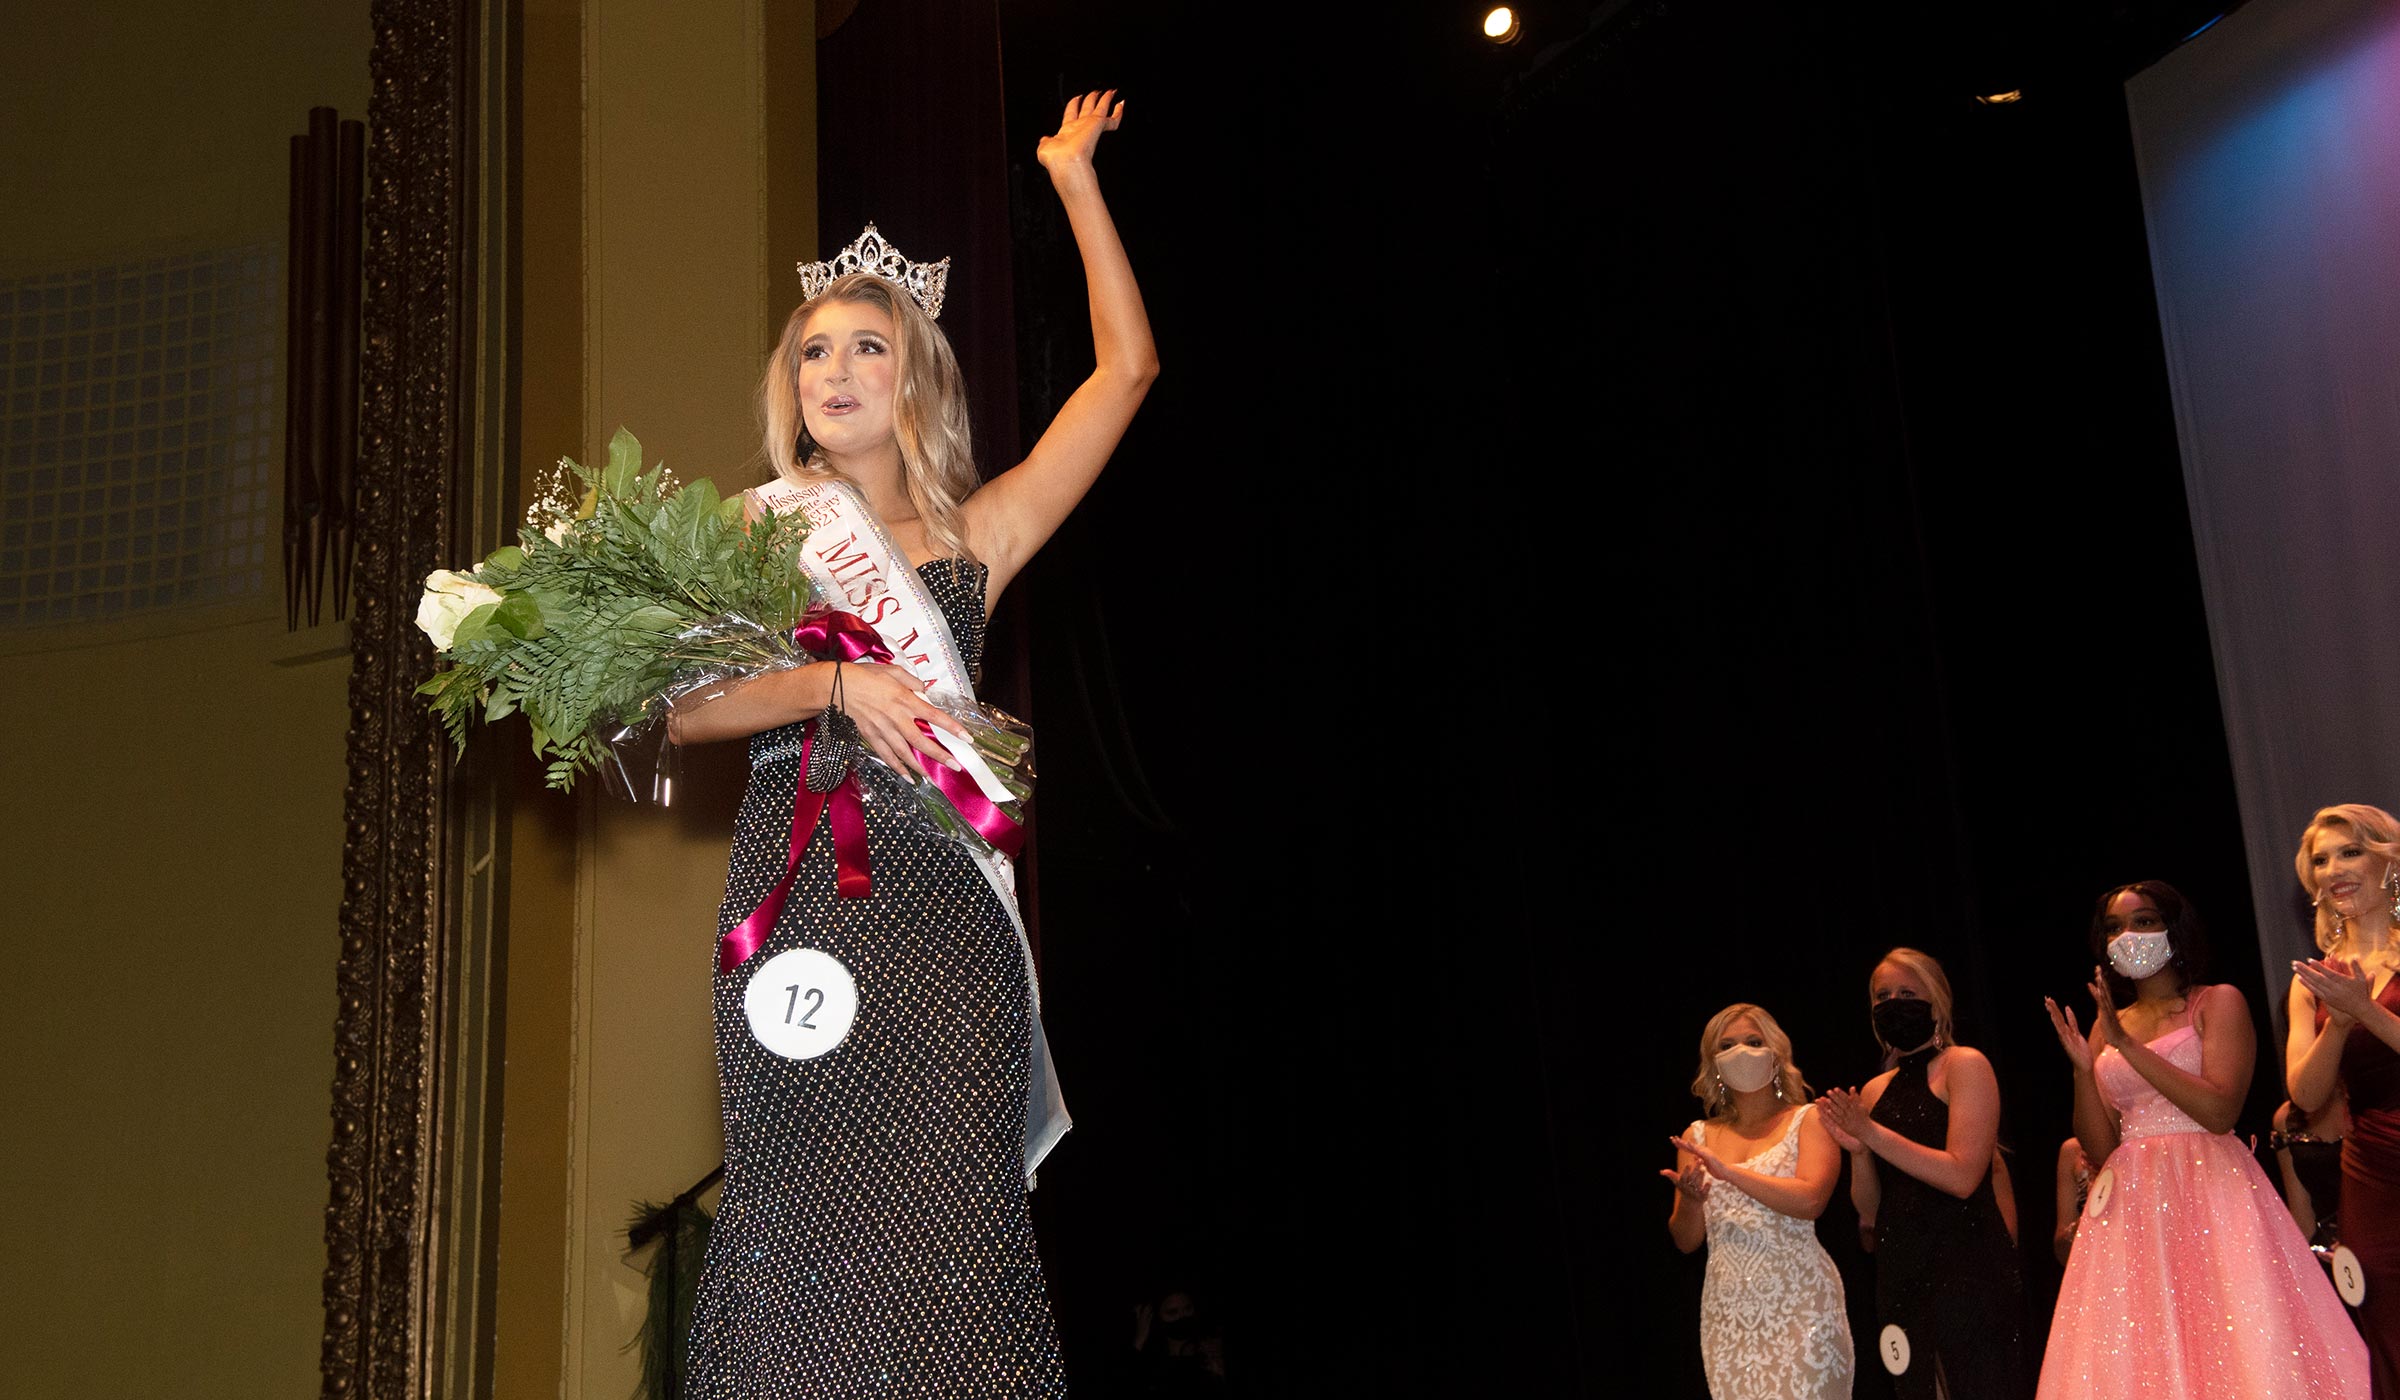 Woman in sparkly black dress, sash, and crown waving on stage